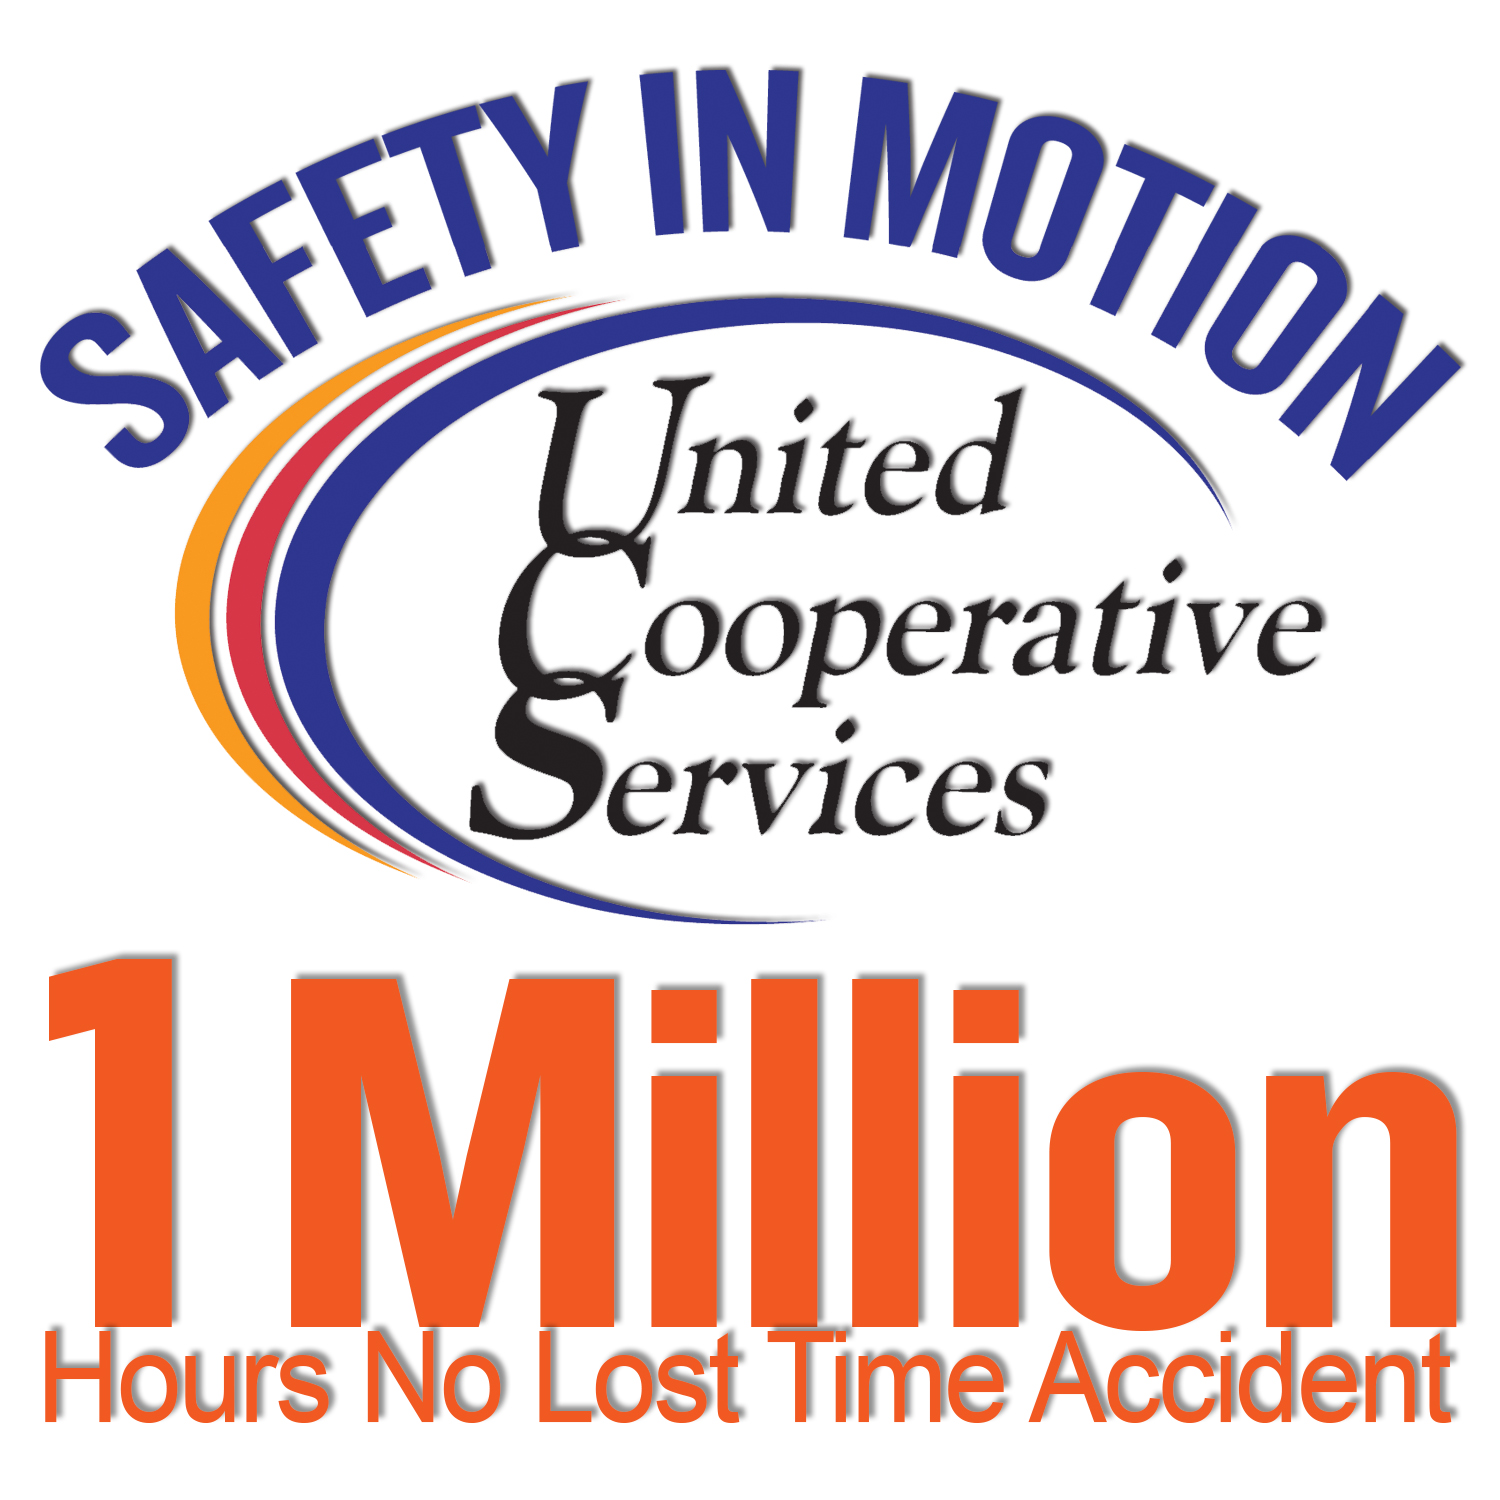 1 million hours no lost time accident